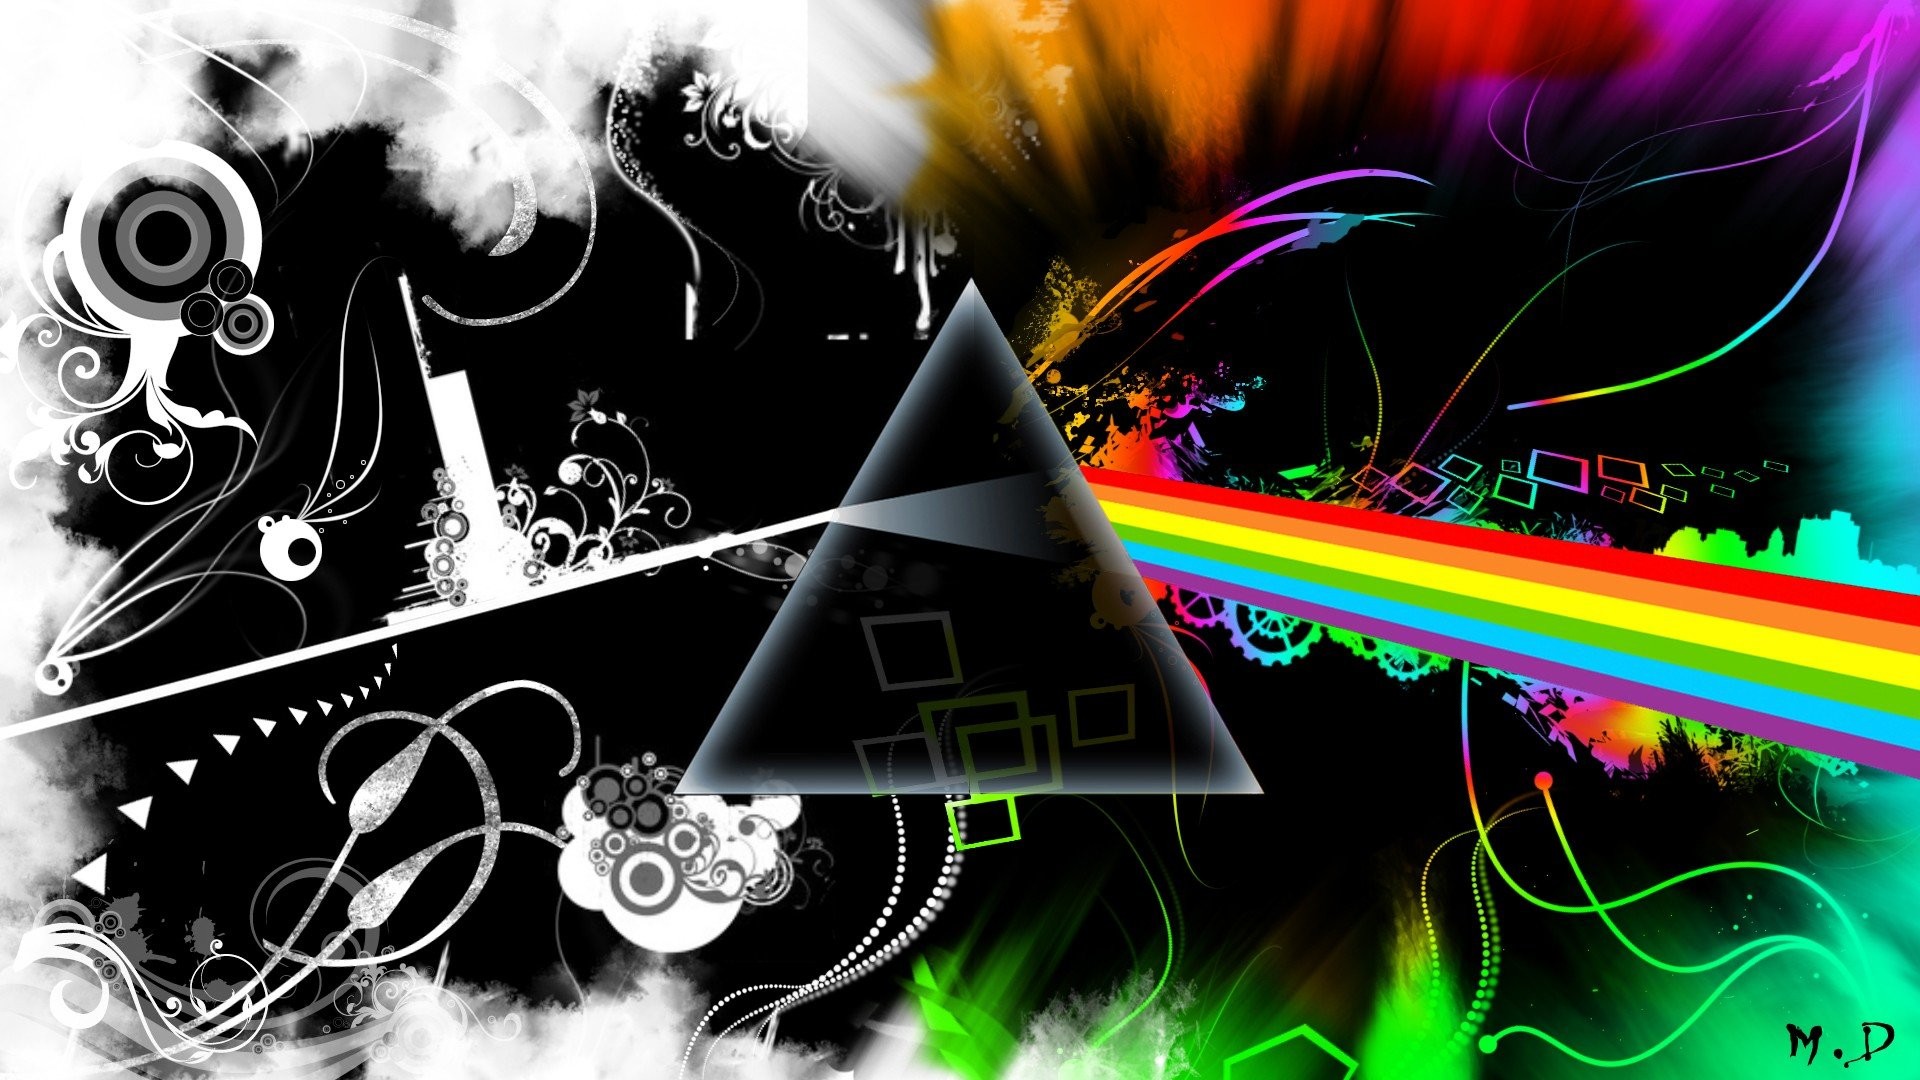 1920x1080 Abstract music Pink Floyd multicolor Rock music The Dark Side Of The Moon  another brick in the wall wallpaper |  | 327758 | WallpaperUP